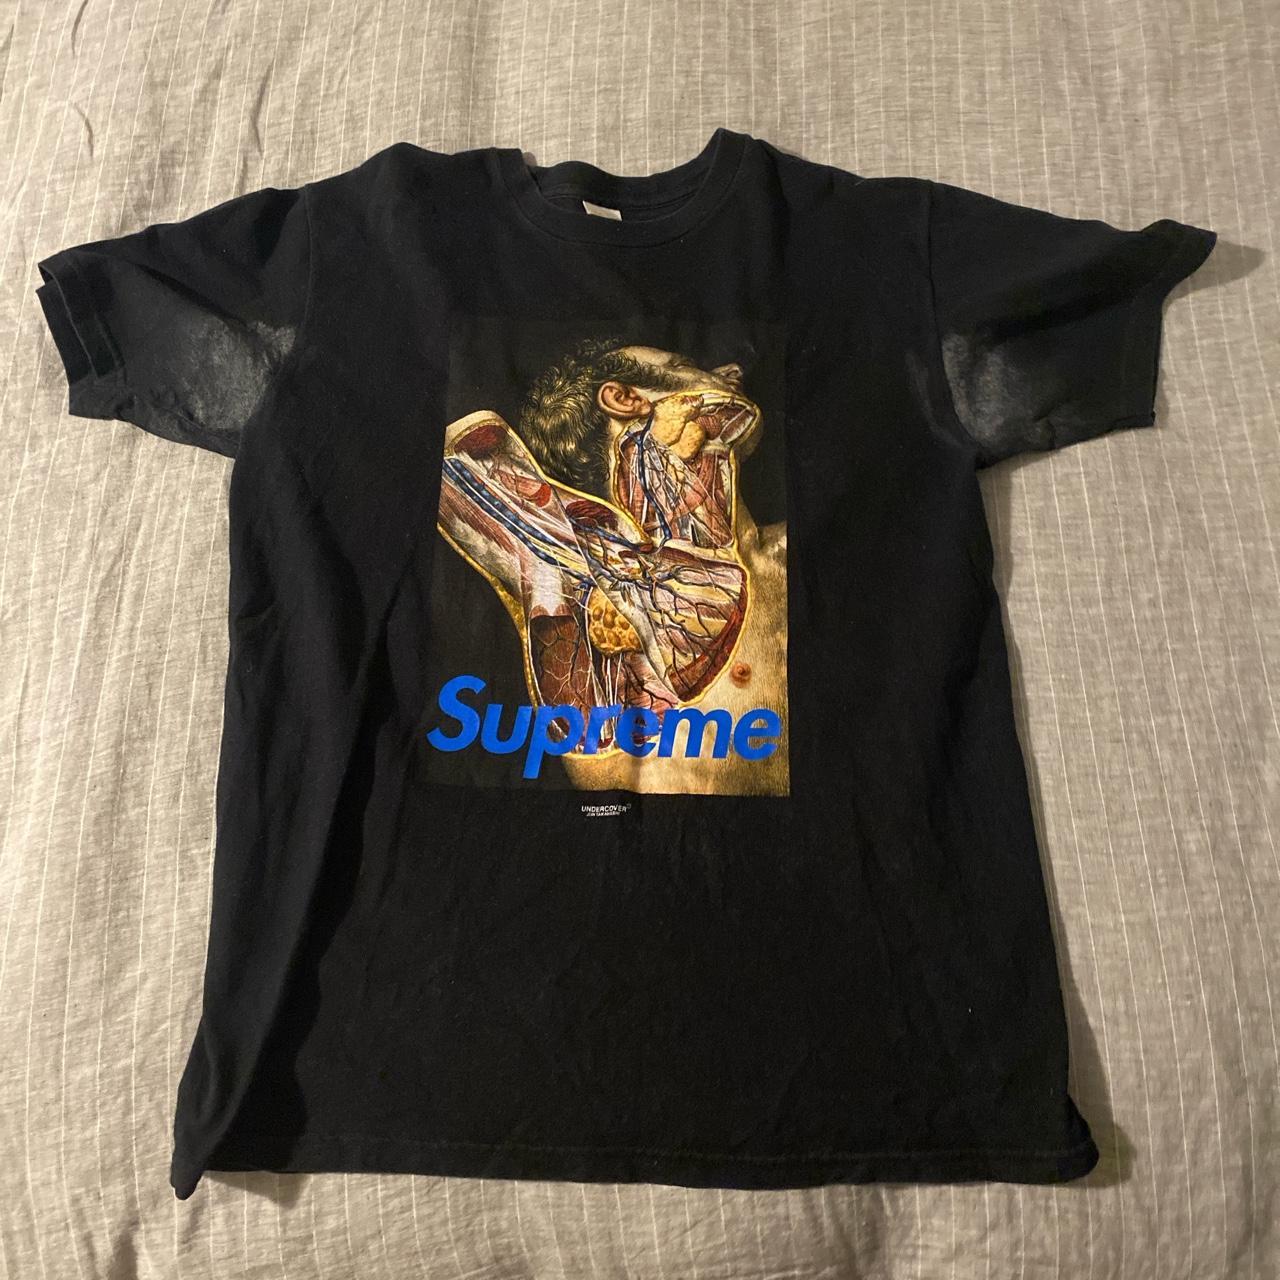 Supreme and Undercover “Anatomy T shirt from FW... - Depop